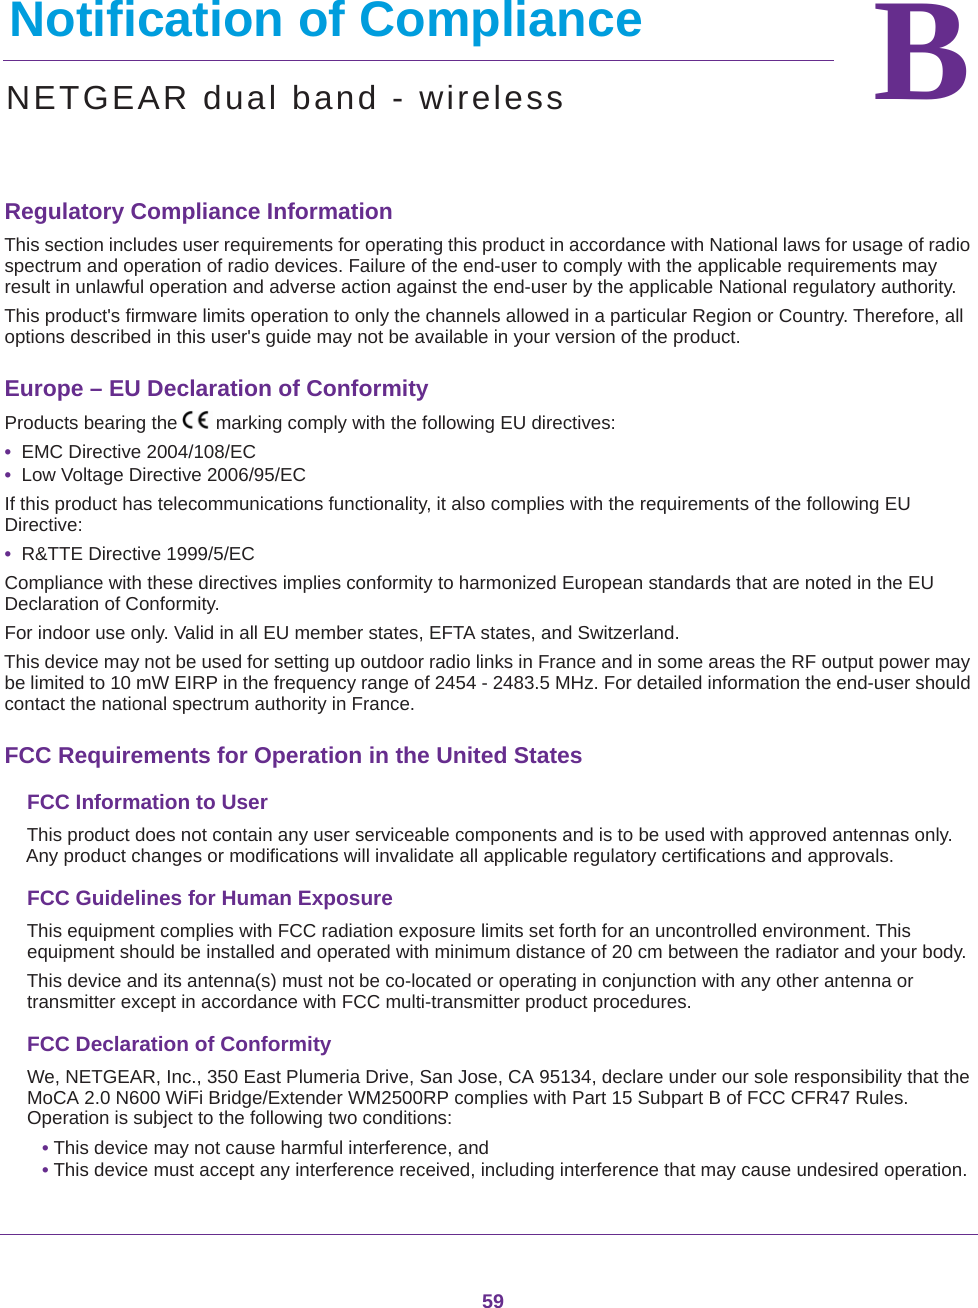 59BB.   Notification of ComplianceNETGEAR dual band - wirelessRegulatory Compliance InformationThis section includes user requirements for operating this product in accordance with National laws for usage of radio spectrum and operation of radio devices. Failure of the end-user to comply with the applicable requirements may result in unlawful operation and adverse action against the end-user by the applicable National regulatory authority.This product&apos;s firmware limits operation to only the channels allowed in a particular Region or Country. Therefore, all options described in this user&apos;s guide may not be available in your version of the product.Europe – EU Declaration of Conformity Products bearing the marking comply with the following EU directives:•  EMC Directive 2004/108/EC•  Low Voltage Directive 2006/95/ECIf this product has telecommunications functionality, it also complies with the requirements of the following EU Directive:•  R&amp;TTE Directive 1999/5/ECCompliance with these directives implies conformity to harmonized European standards that are noted in the EU Declaration of Conformity. For indoor use only. Valid in all EU member states, EFTA states, and Switzerland.This device may not be used for setting up outdoor radio links in France and in some areas the RF output power may be limited to 10 mW EIRP in the frequency range of 2454 - 2483.5 MHz. For detailed information the end-user should contact the national spectrum authority in France.FCC Requirements for Operation in the United States FCC Information to UserThis product does not contain any user serviceable components and is to be used with approved antennas only. Any product changes or modifications will invalidate all applicable regulatory certifications and approvals.FCC Guidelines for Human ExposureThis equipment complies with FCC radiation exposure limits set forth for an uncontrolled environment. This equipment should be installed and operated with minimum distance of 20 cm between the radiator and your body.This device and its antenna(s) must not be co-located or operating in conjunction with any other antenna or transmitter except in accordance with FCC multi-transmitter product procedures.FCC Declaration of ConformityWe, NETGEAR, Inc., 350 East Plumeria Drive, San Jose, CA 95134, declare under our sole responsibility that the MoCA 2.0 N600 WiFi Bridge/Extender WM2500RP complies with Part 15 Subpart B of FCC CFR47 Rules. Operation is subject to the following two conditions:• This device may not cause harmful interference, and• This device must accept any interference received, including interference that may cause undesired operation.